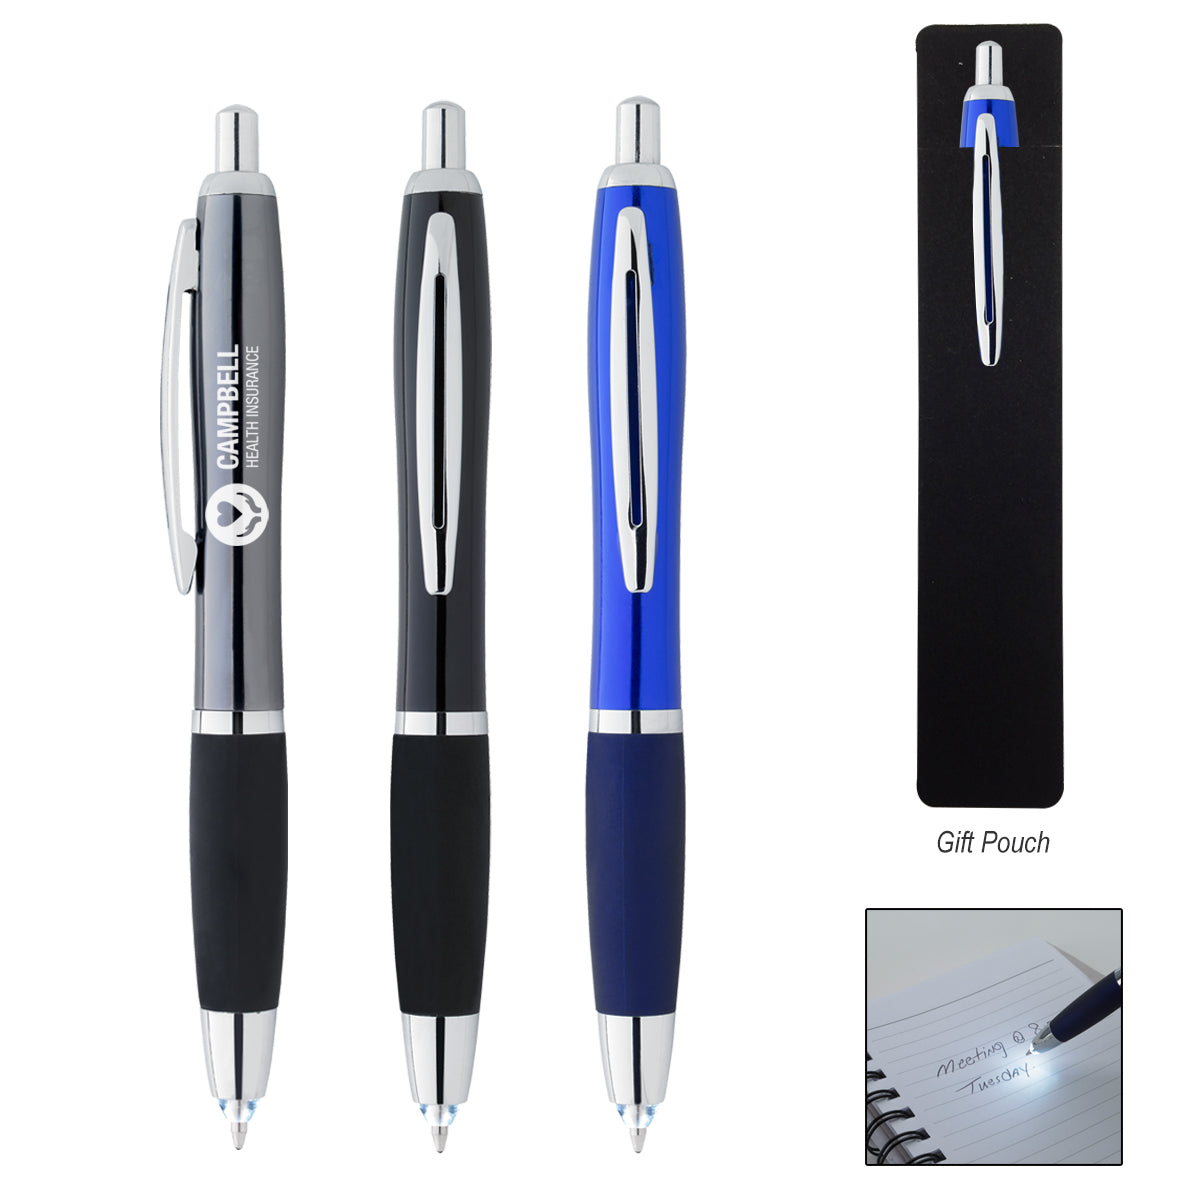 Retractable Pen with LED Light